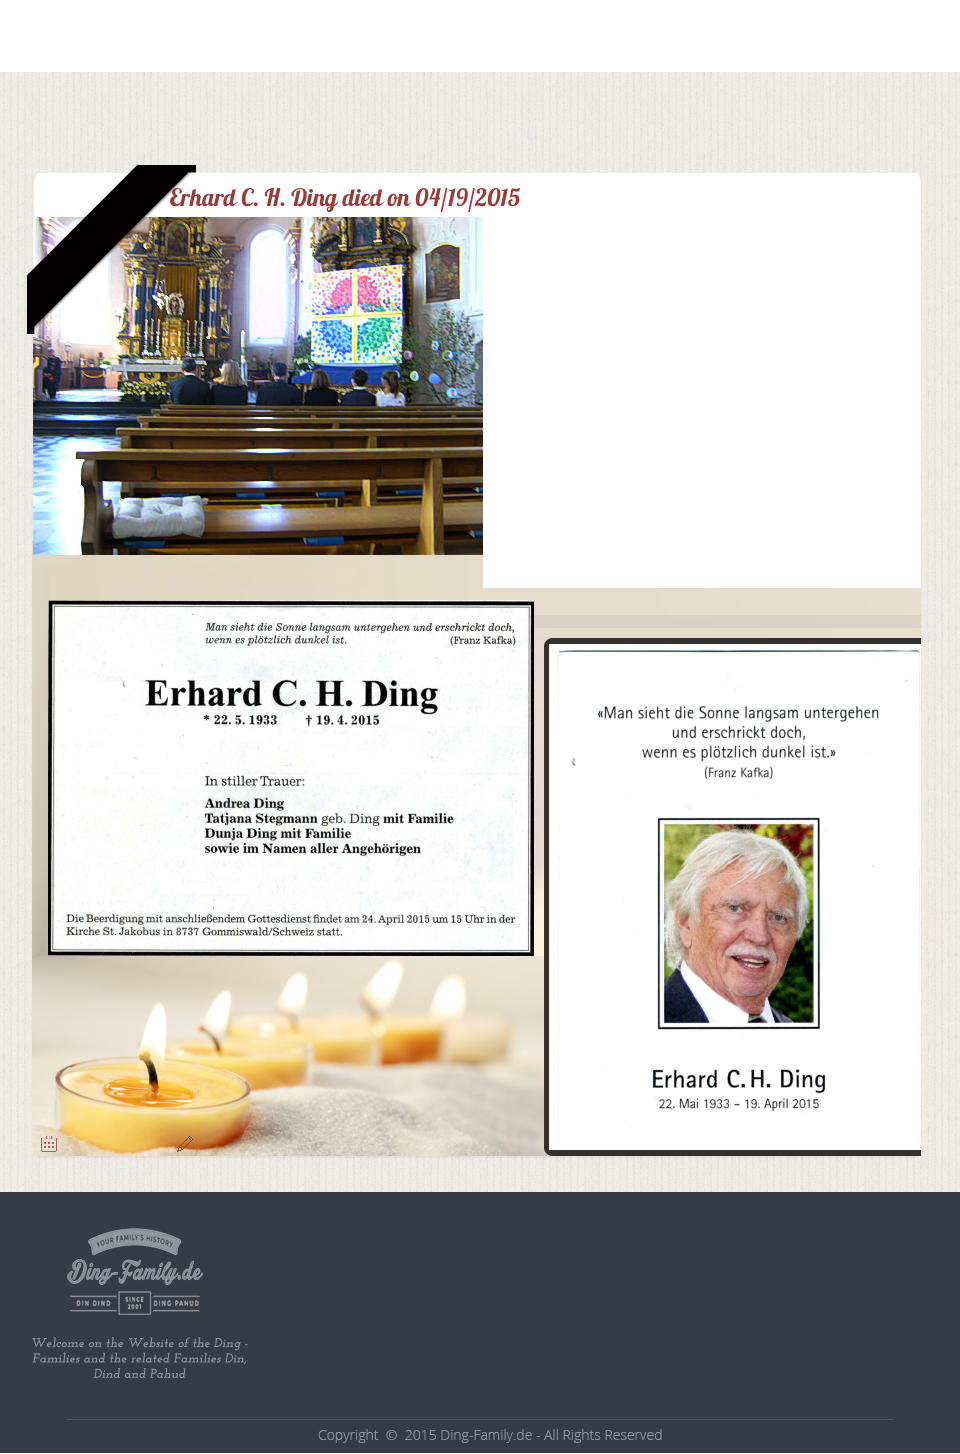 Welcome on the Website of the Ding - Families and the related Families Din, Dind and Pahud Erhard C. H. Ding died on 04/19/2015